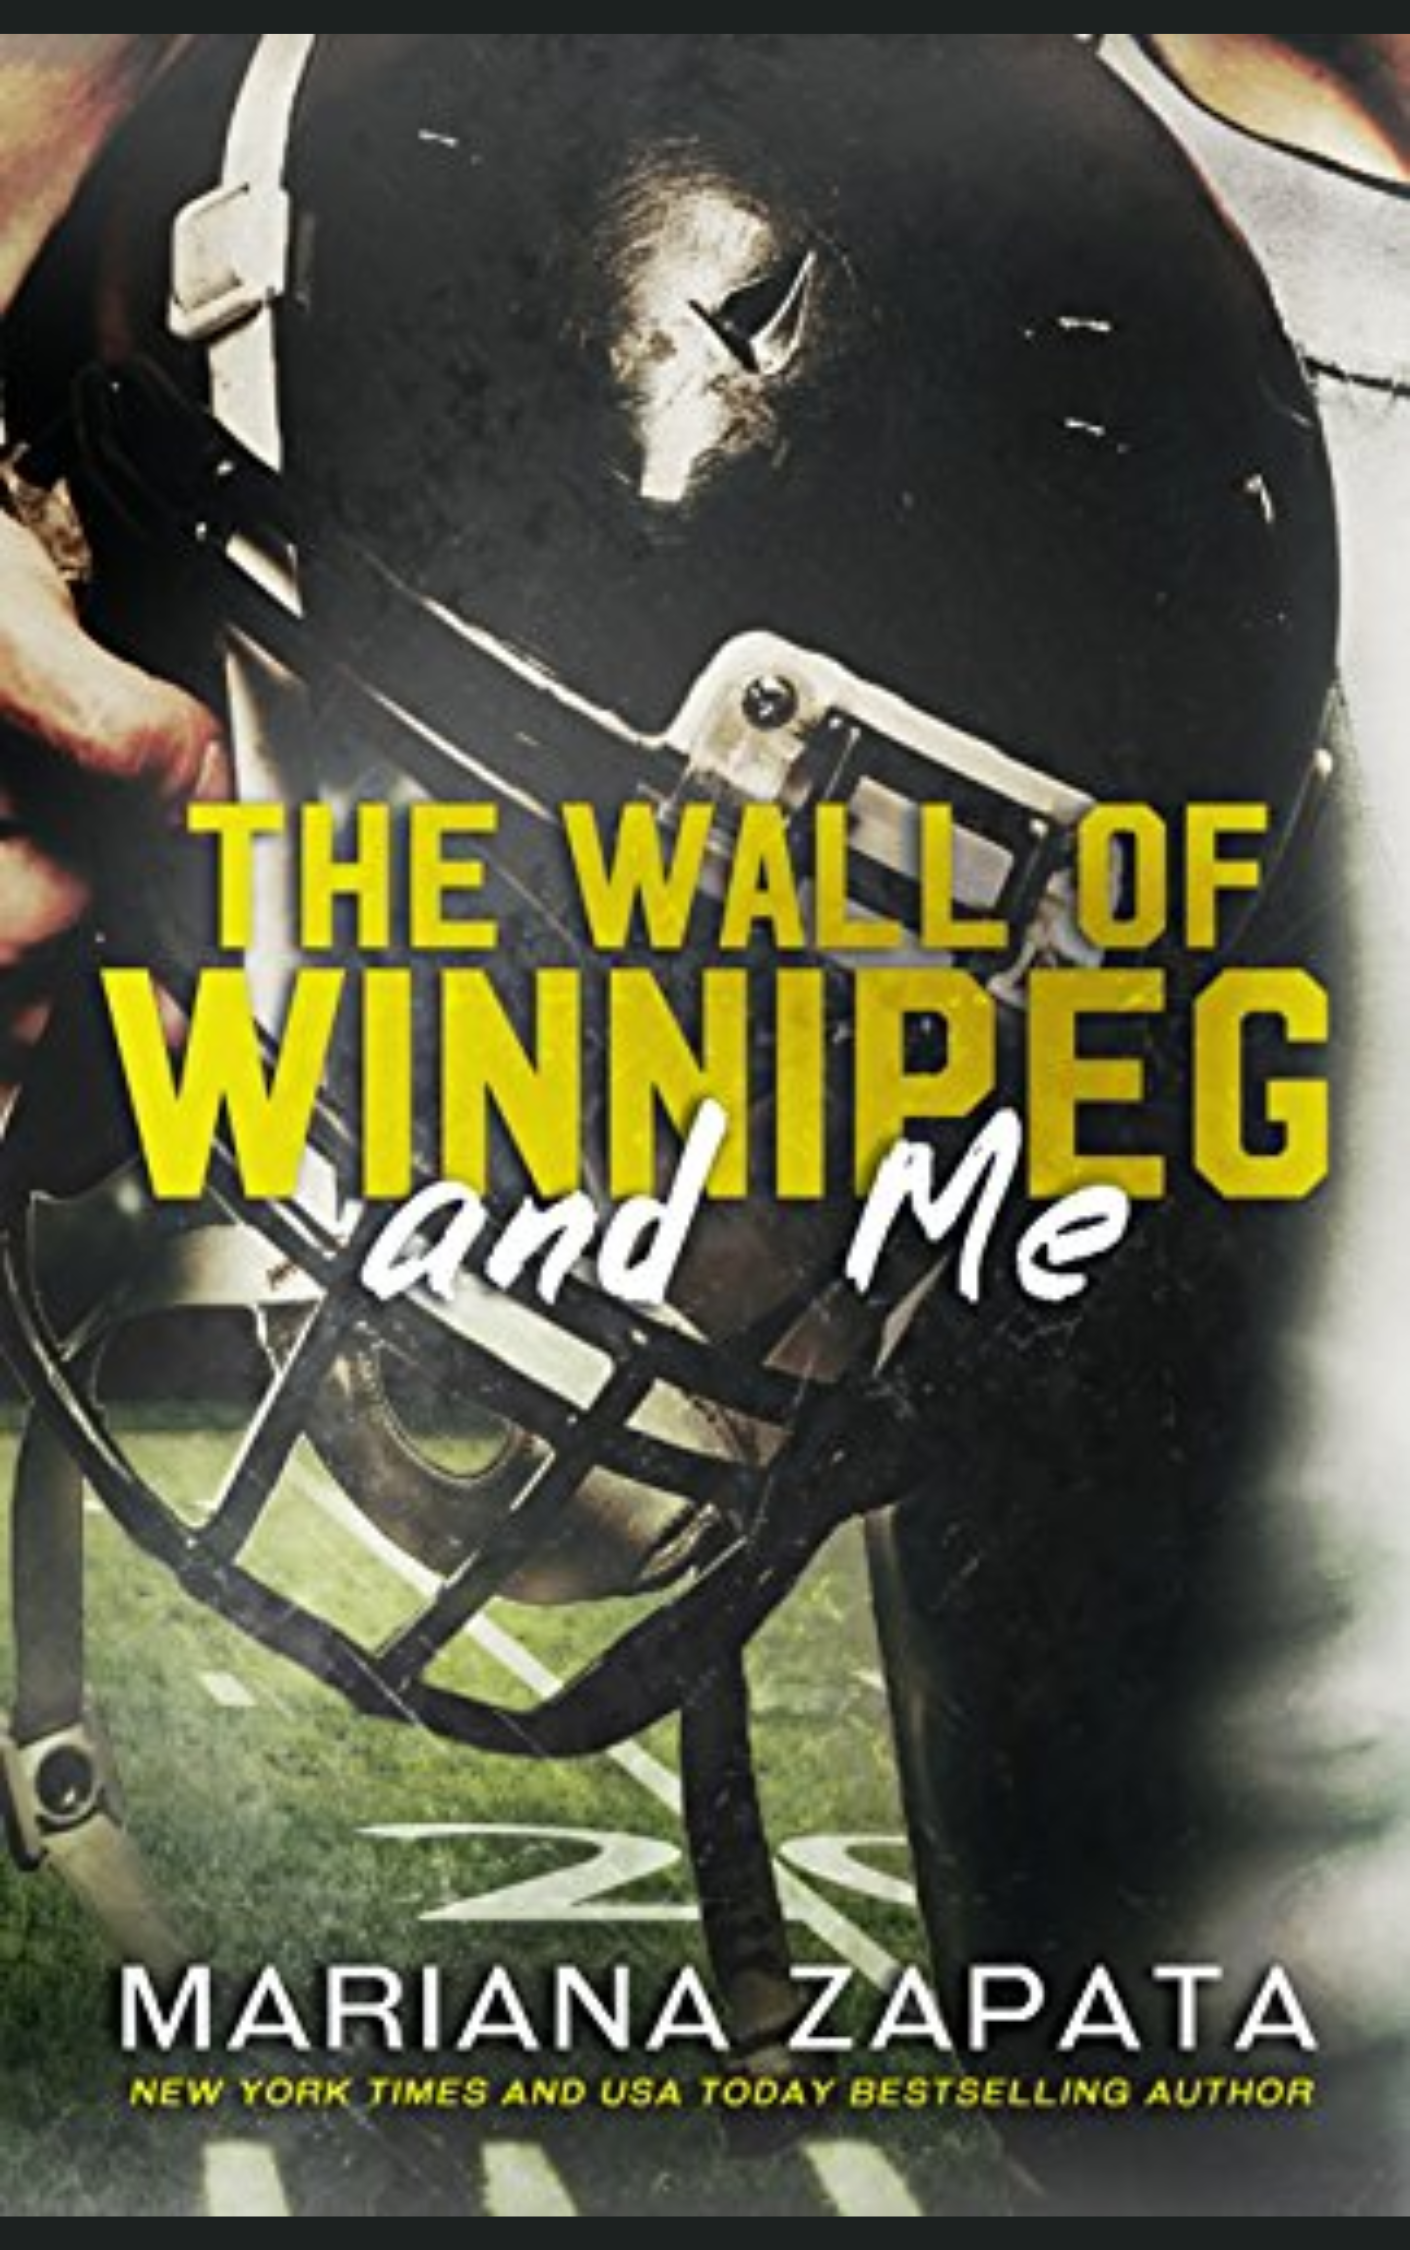 THE WALL OF WINNIPEG AND ME by MARIANA ZAPATA